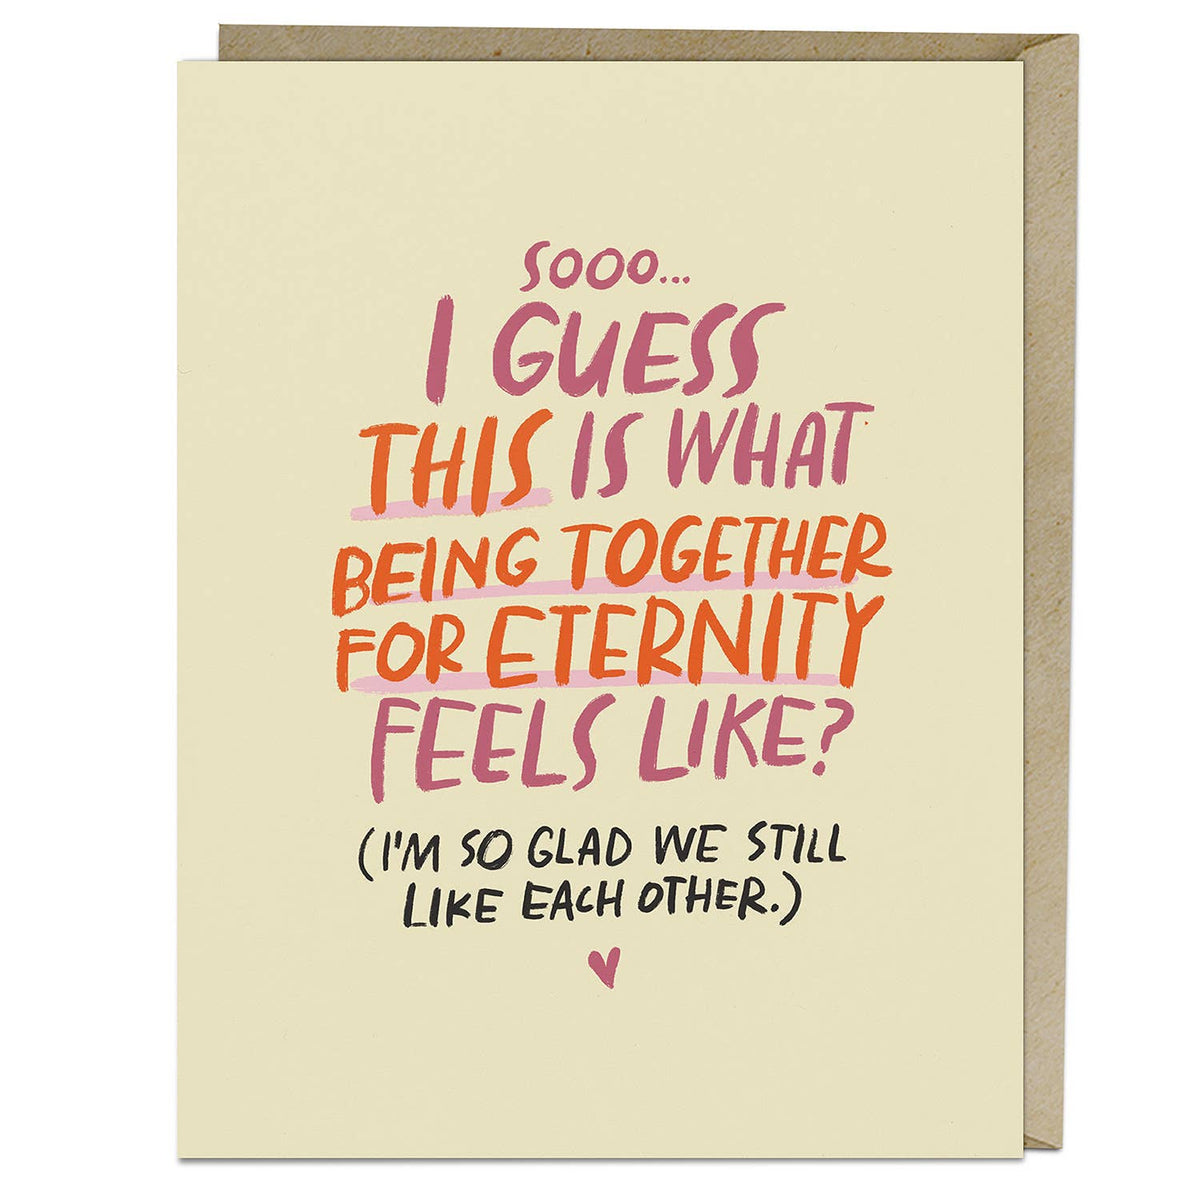 Humorous Card "So I guess this is what being together for eternity feels like"